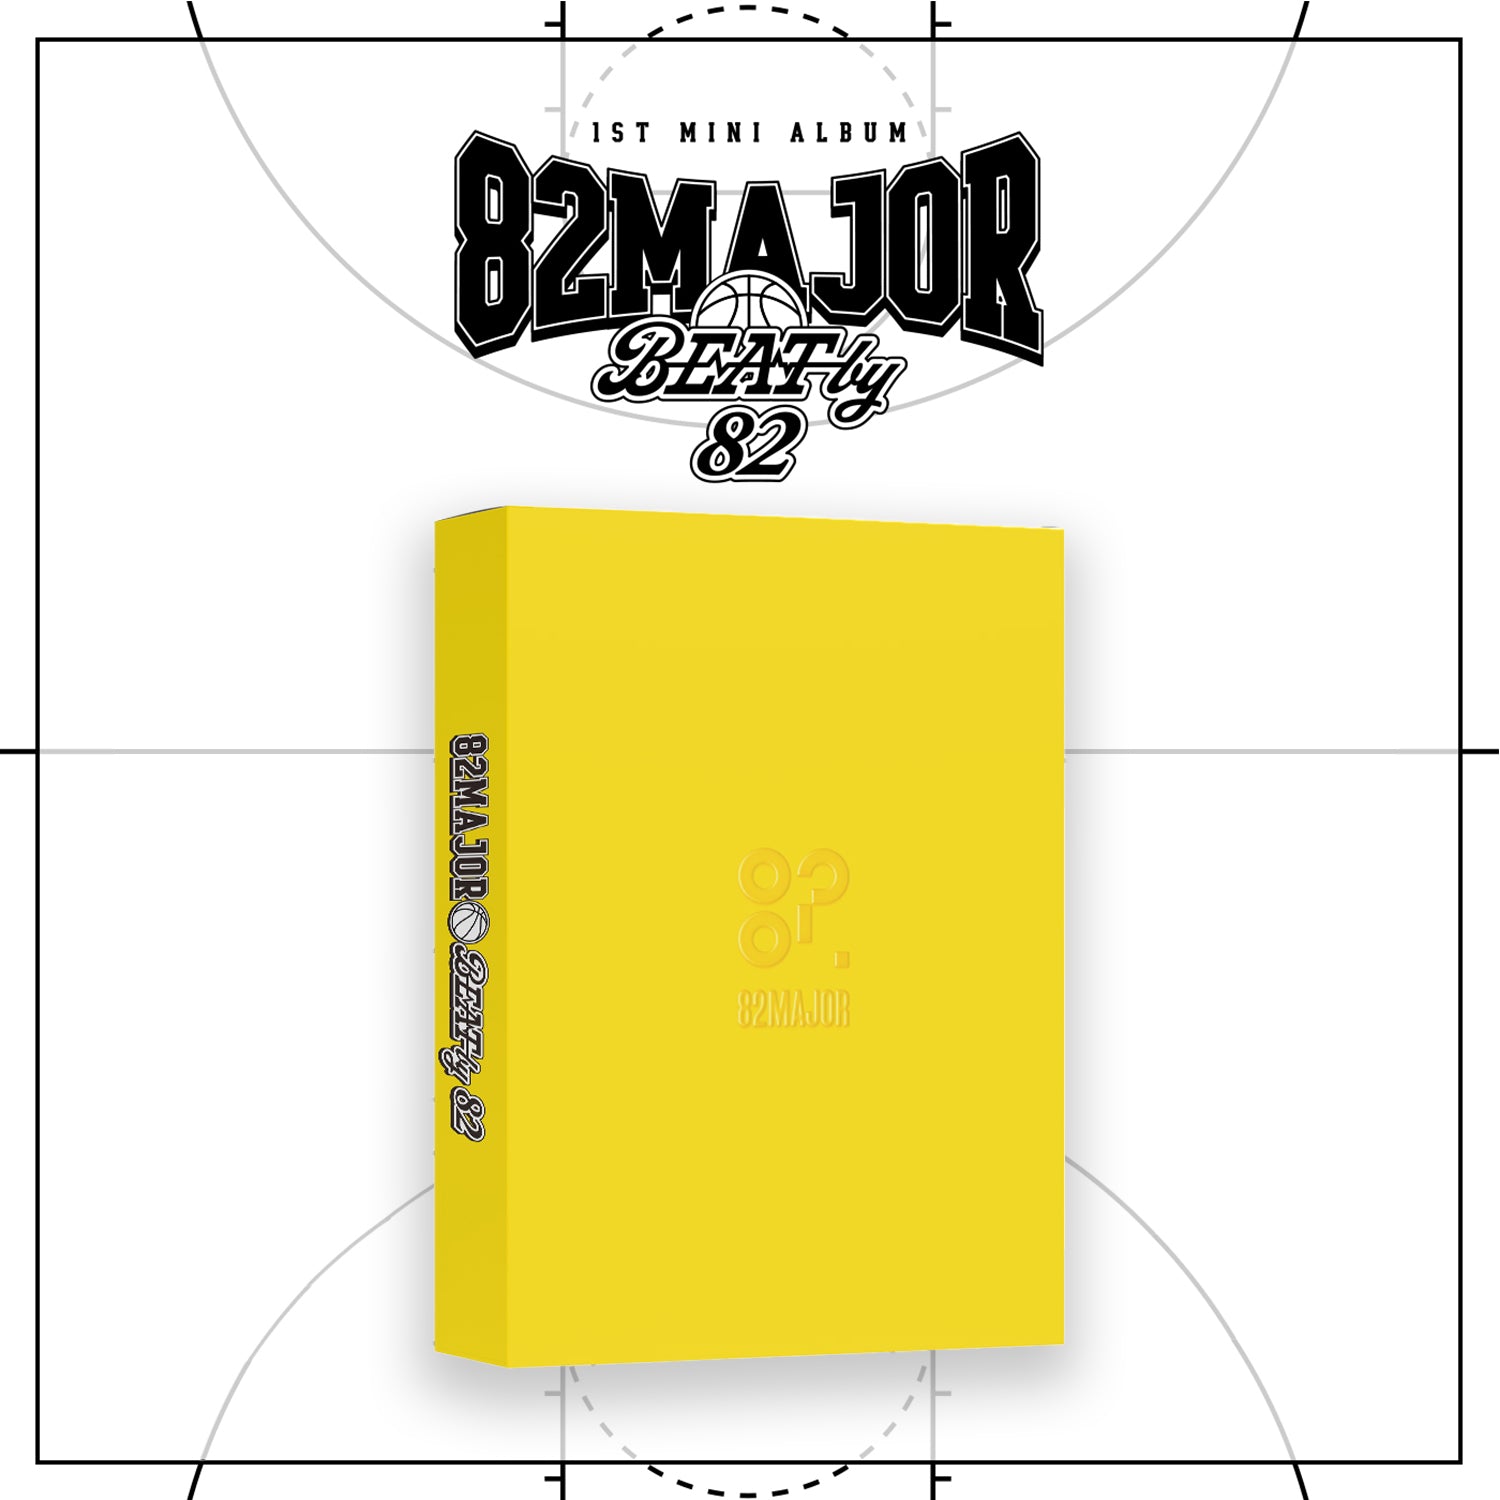 82MAJOR 1ST MINI ALBUM 'BEAT BY 82' AT VERSION COVER